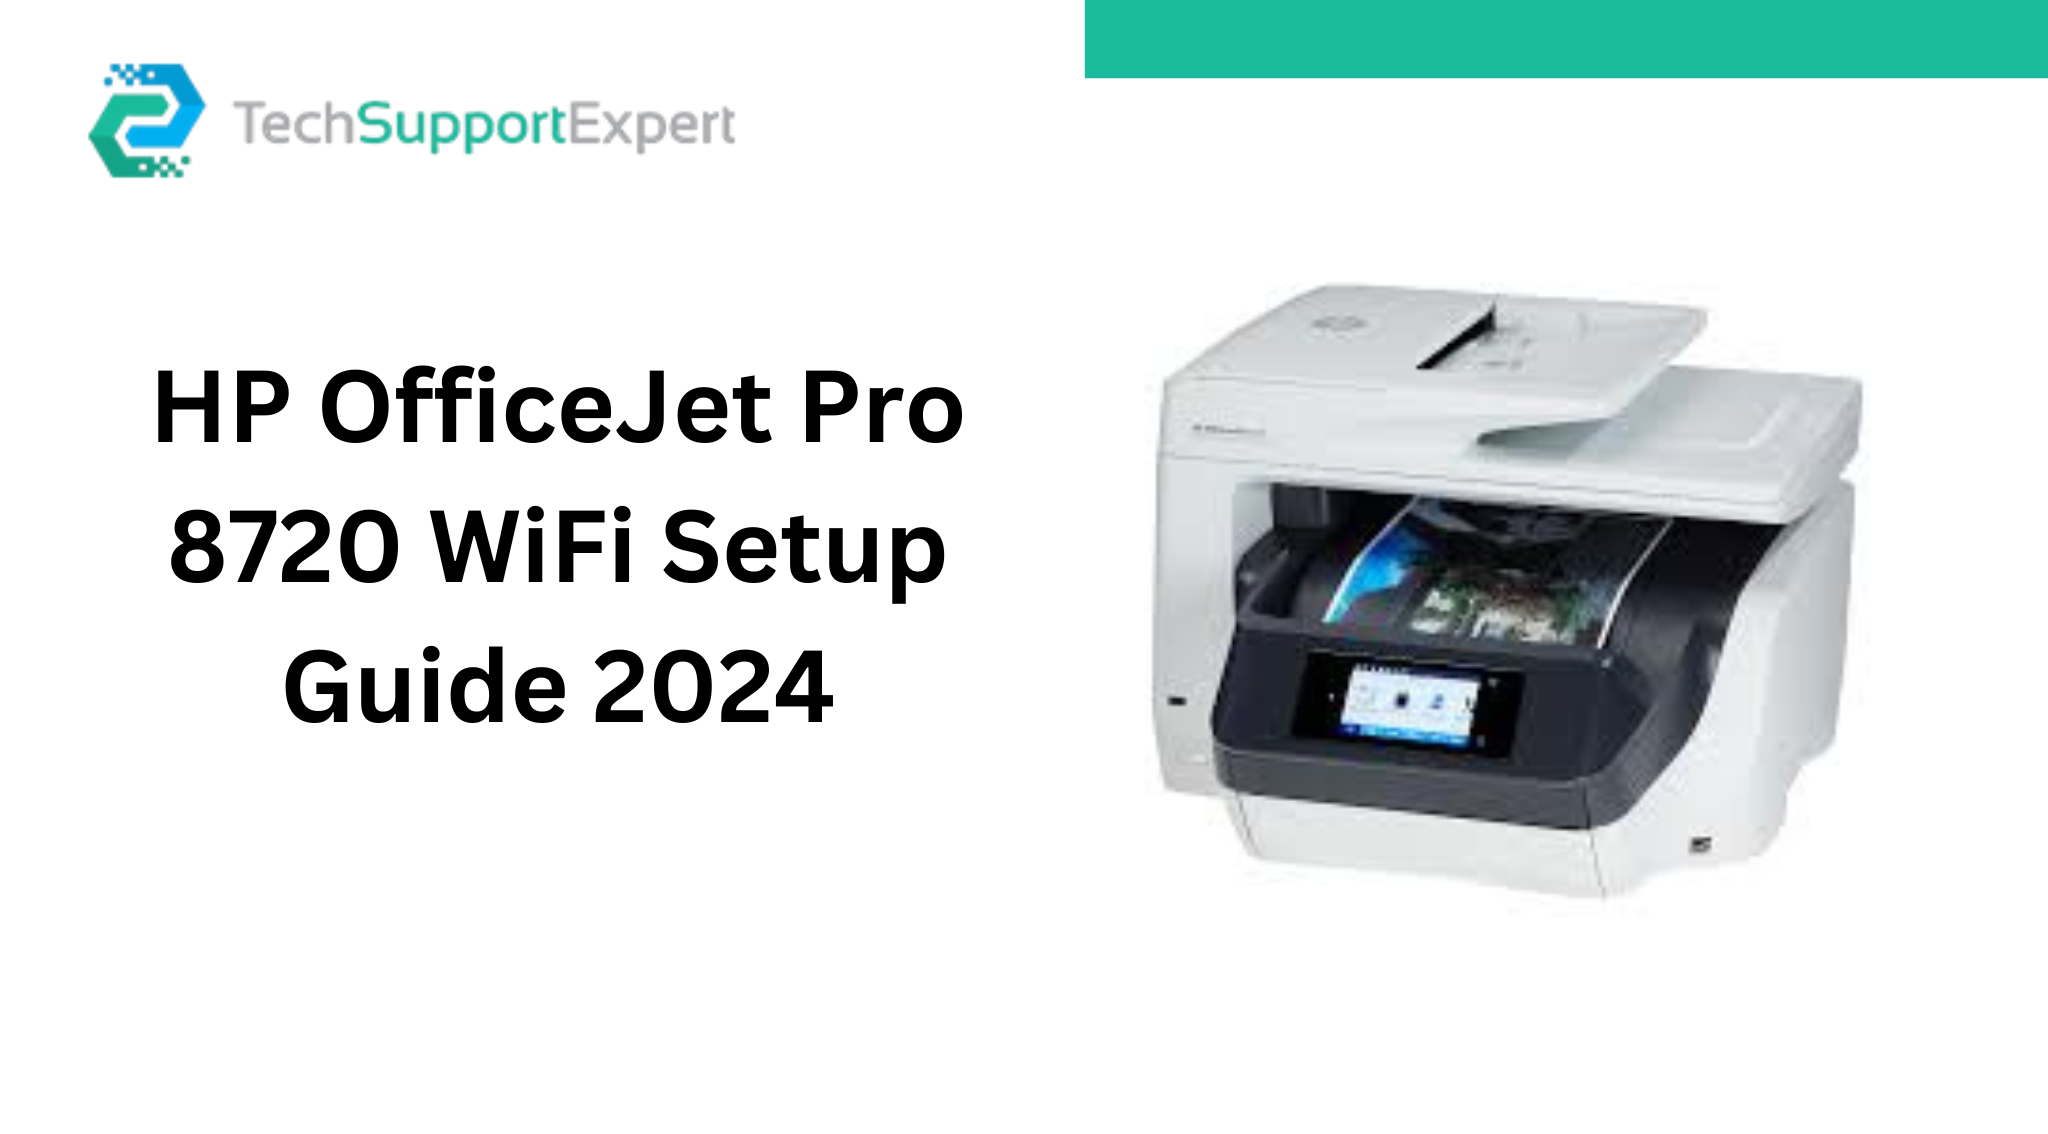 How To Setup HP Officejet Pro 8720 Printer Wireless